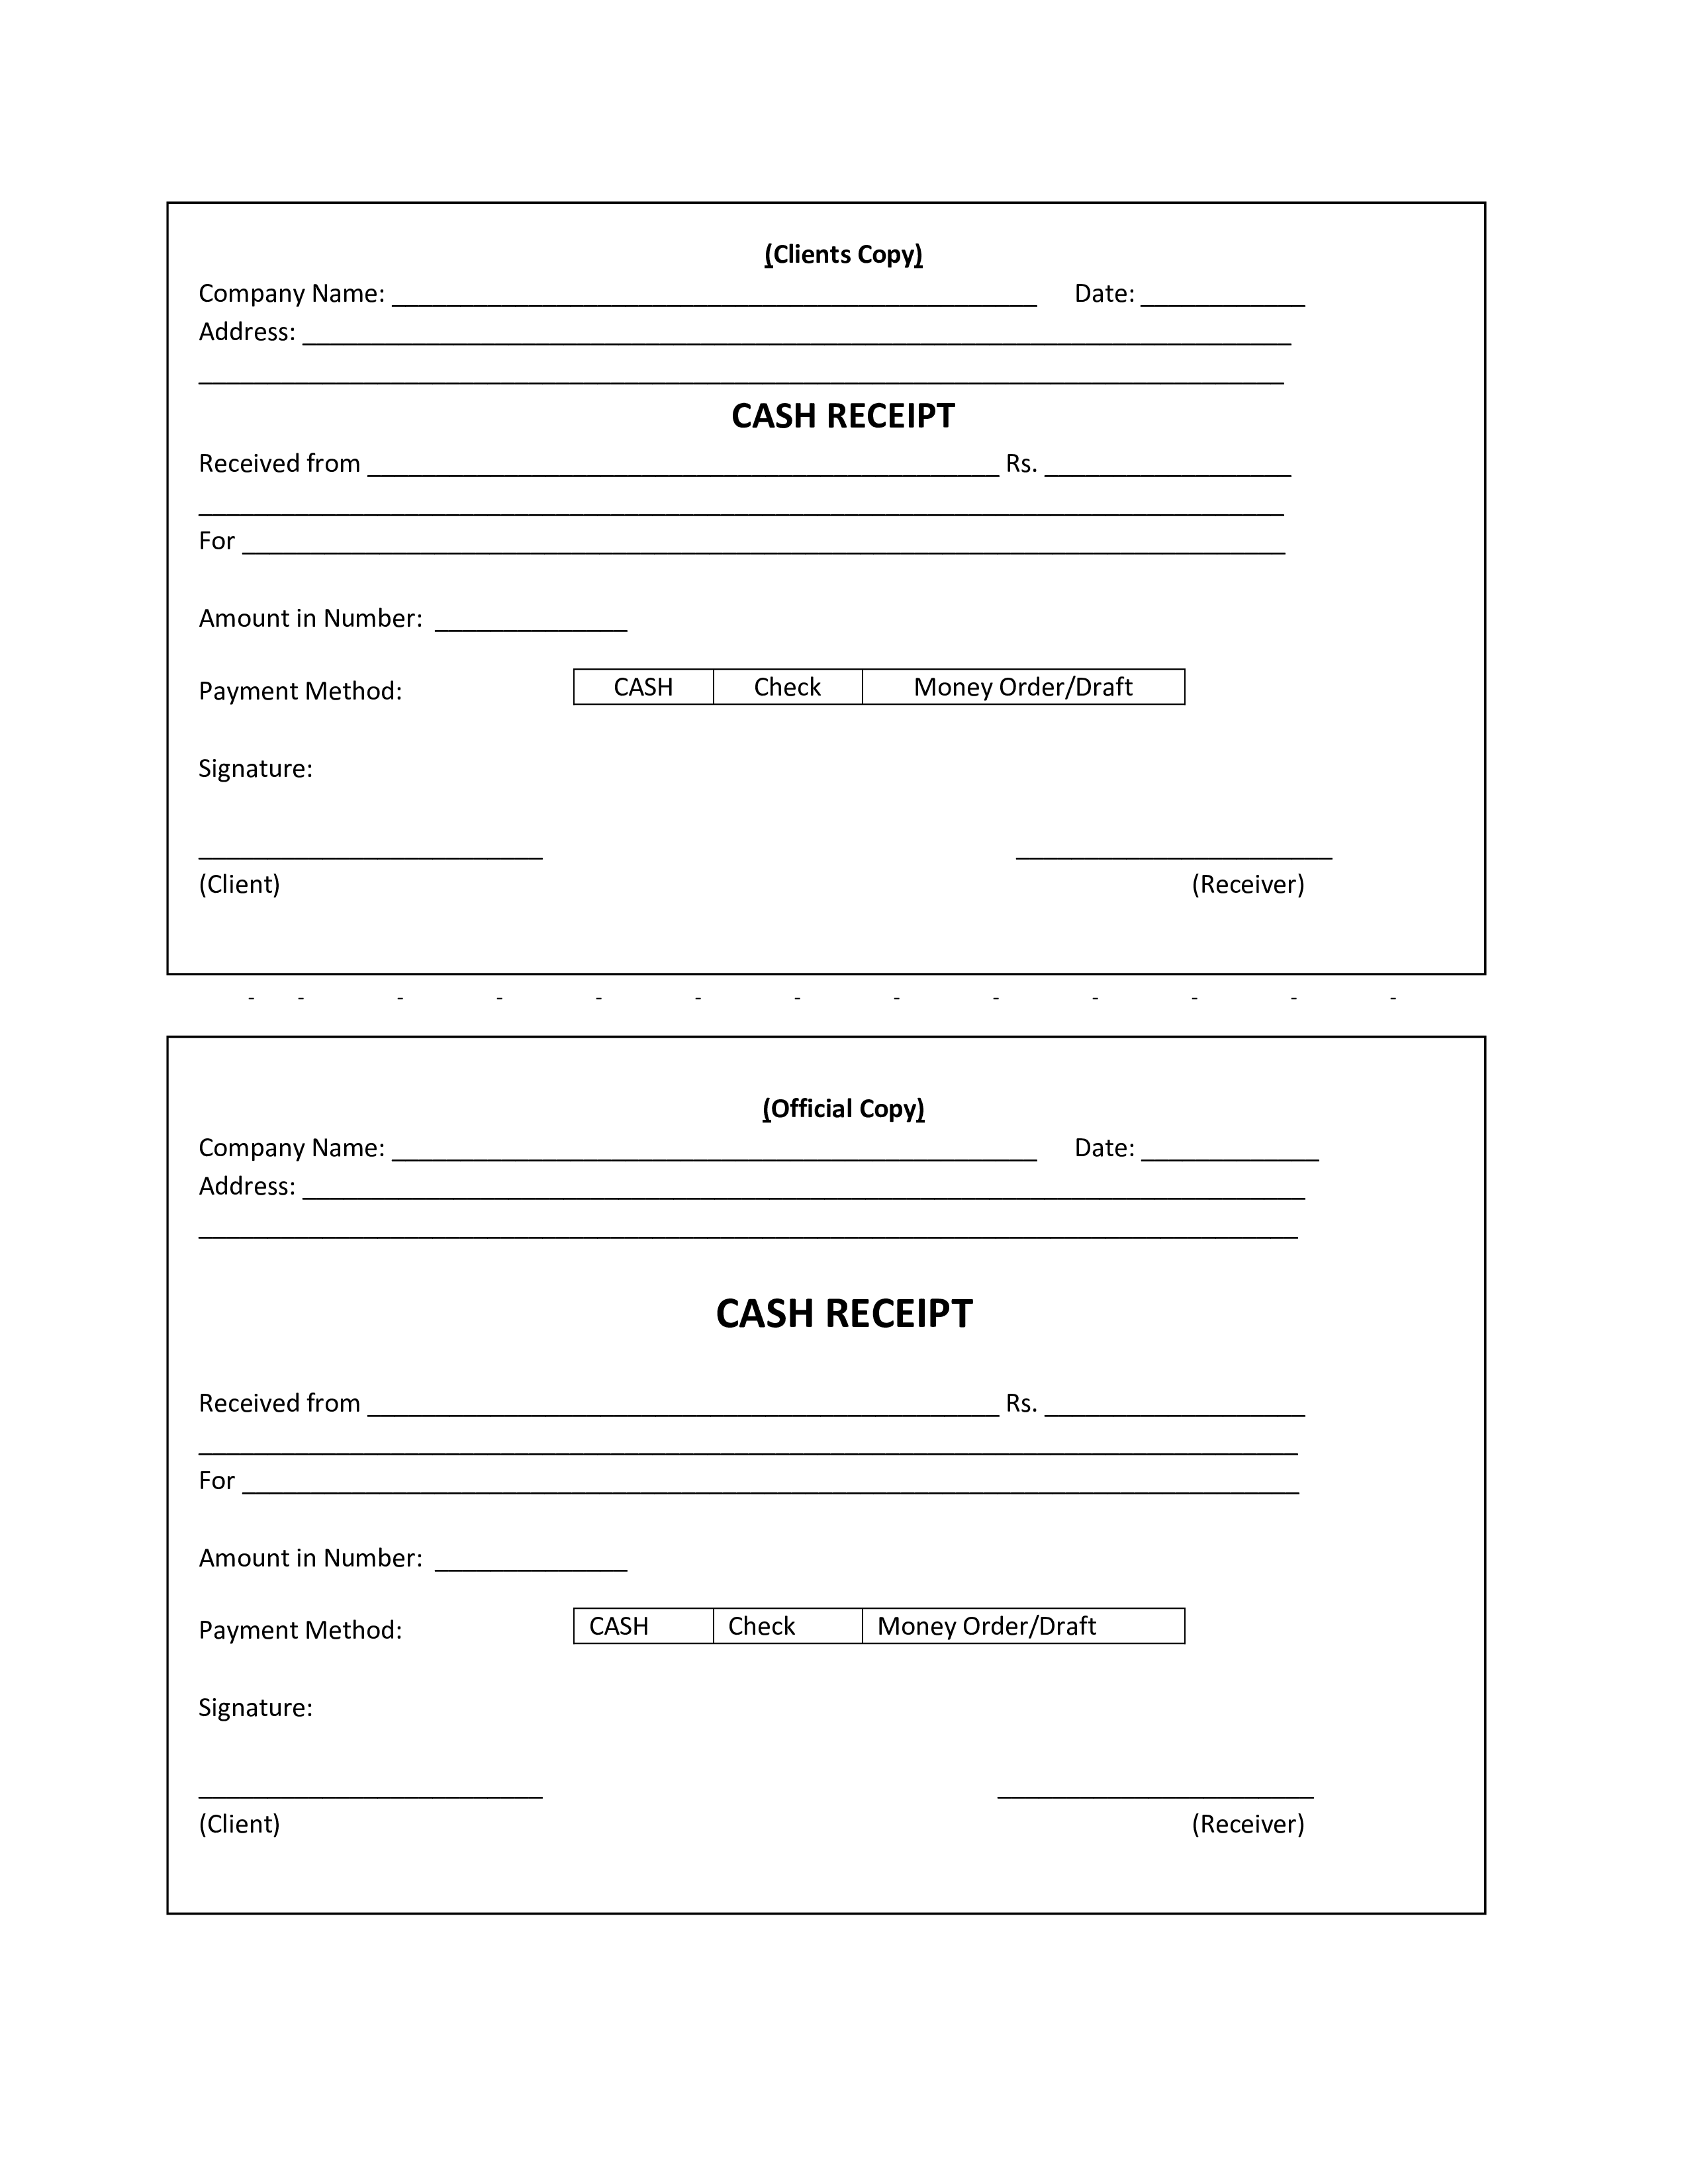 fillable-receipt-form-template-printable-forms-free-online